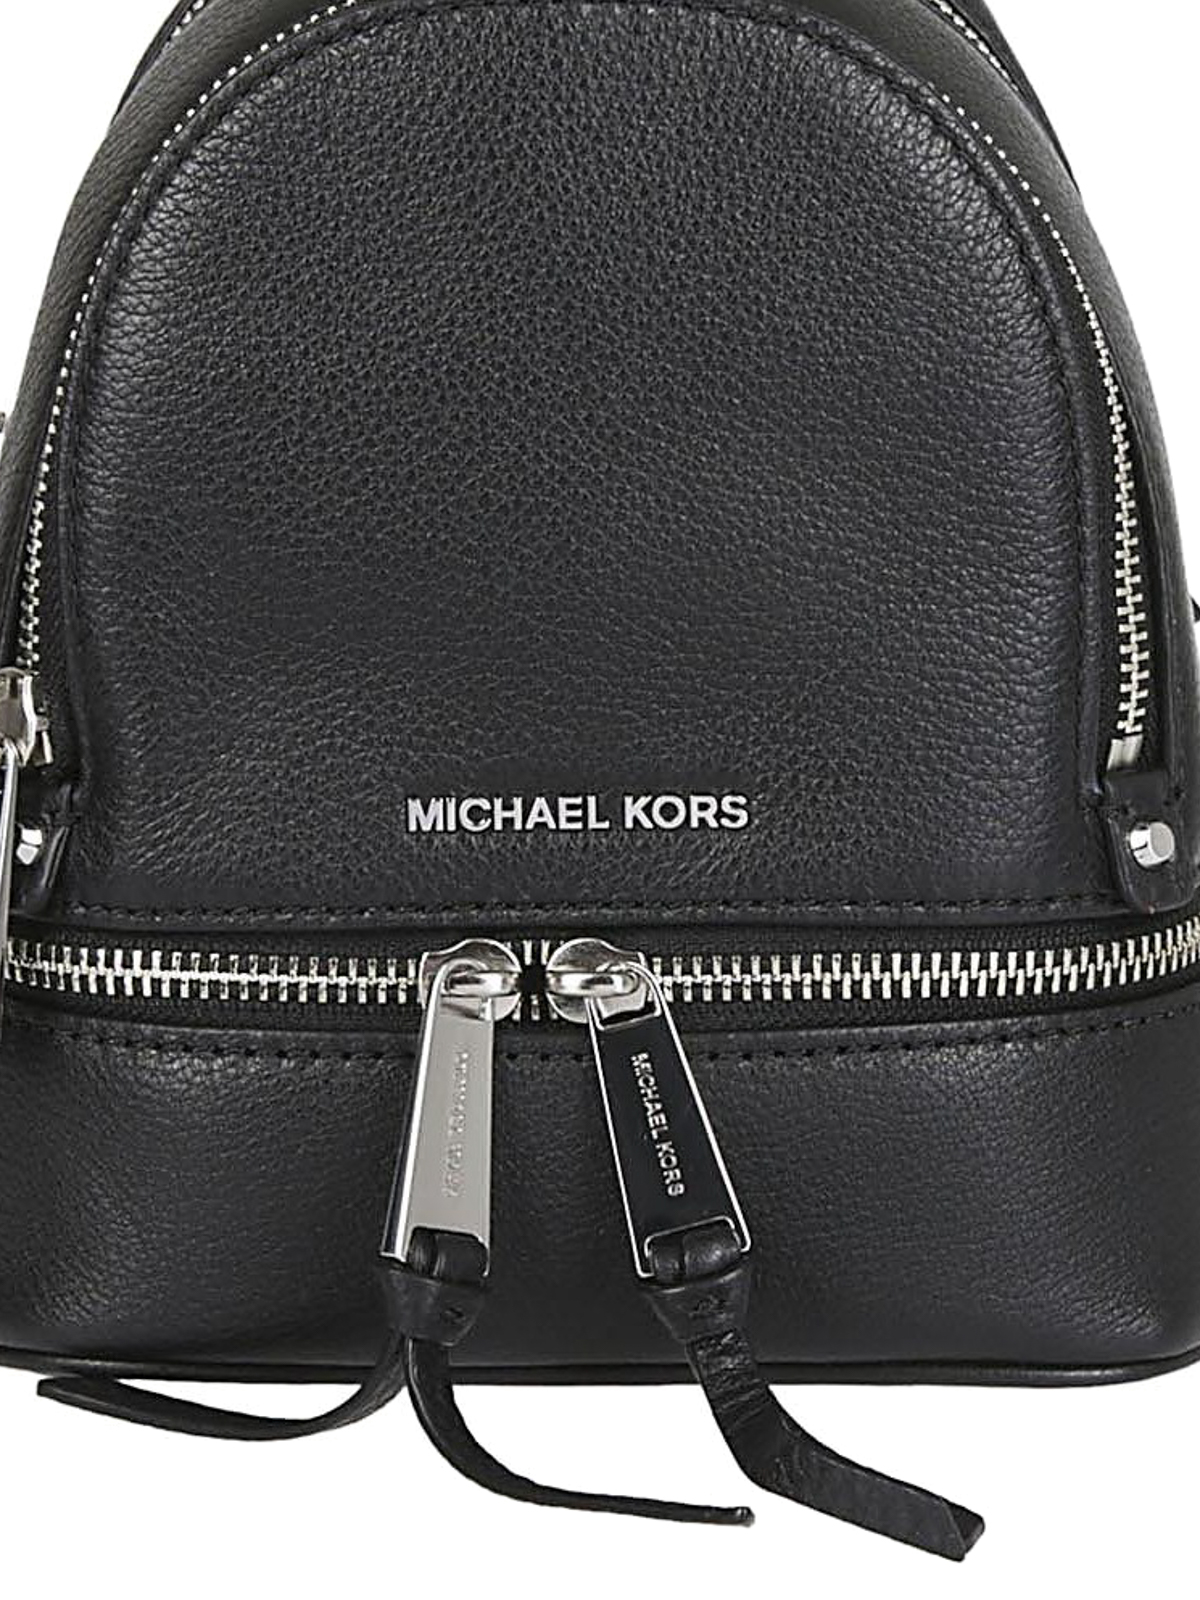 michael kors small leather backpack